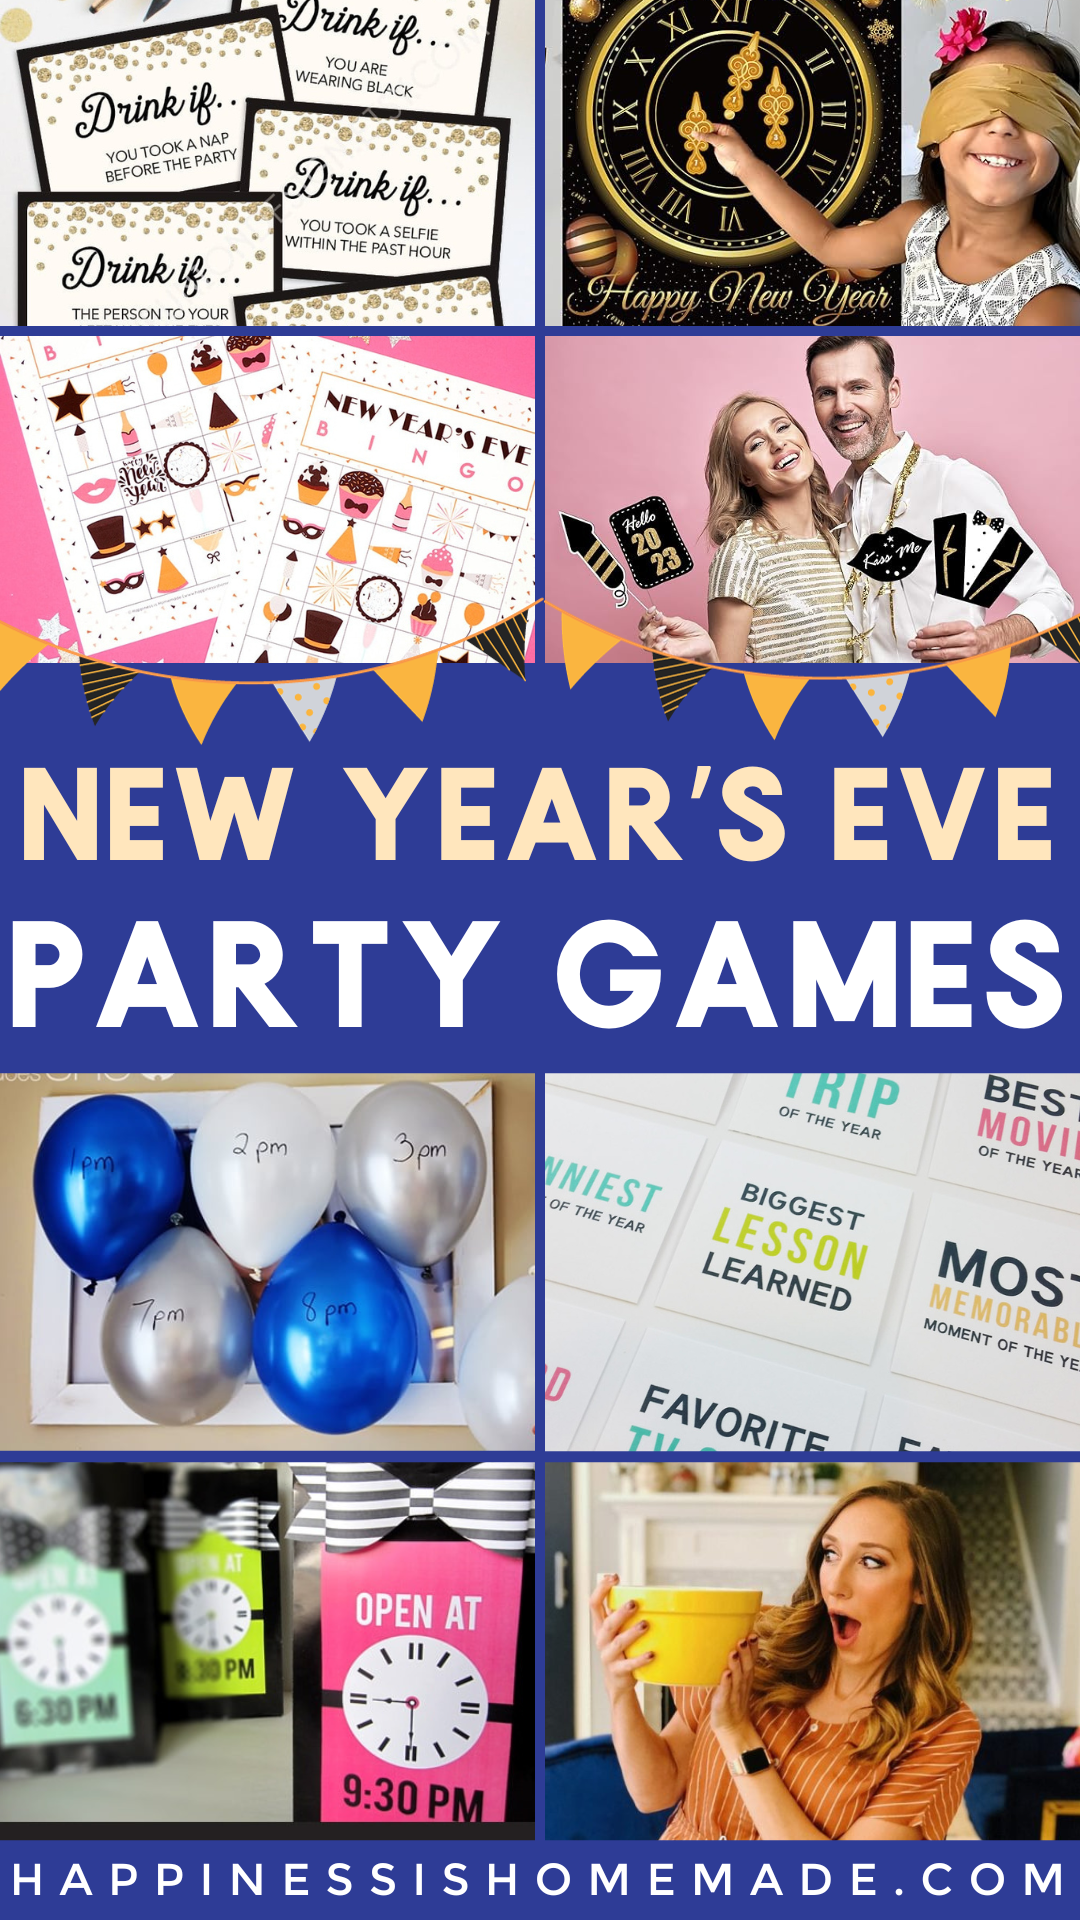 New Year's Eve Party Games